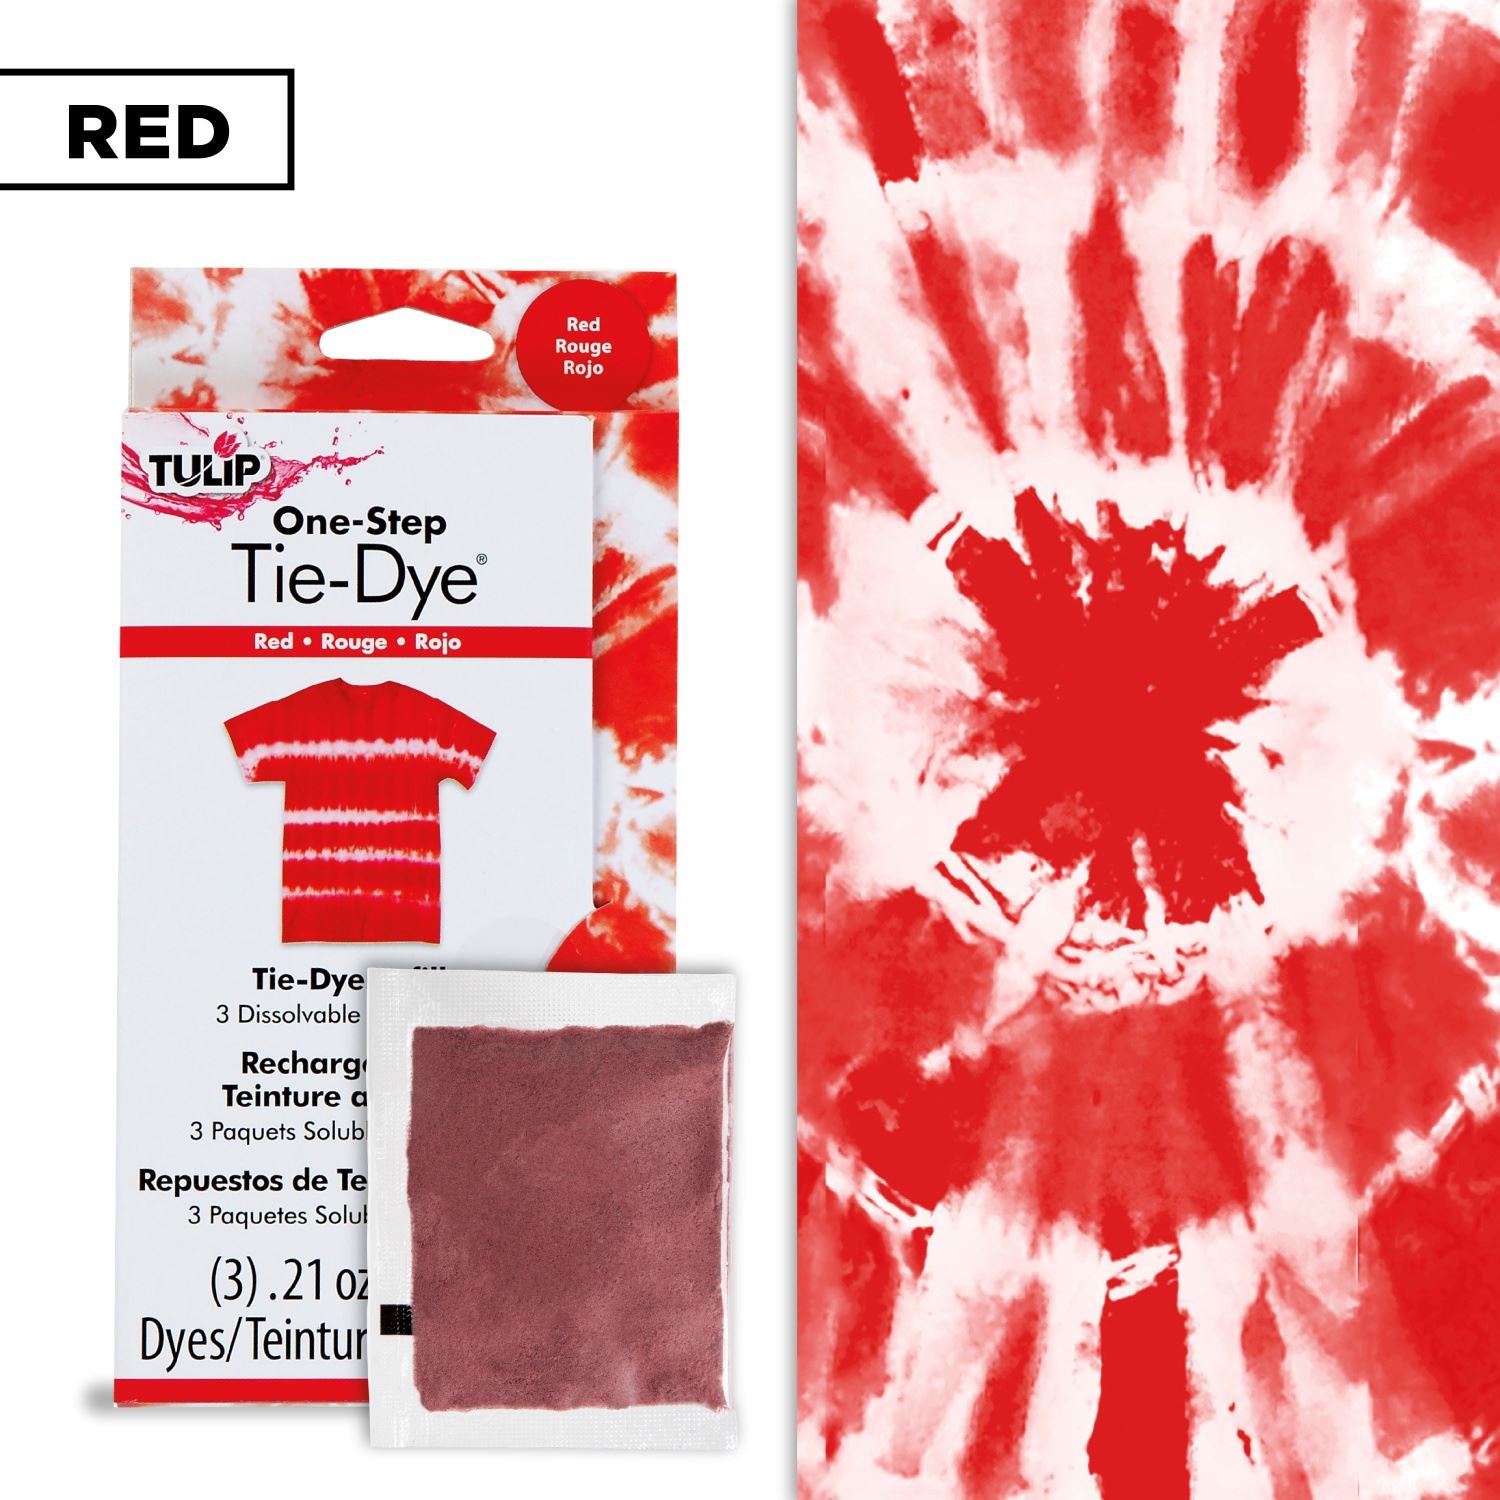 TRG the One Easy Dye #112 Red 